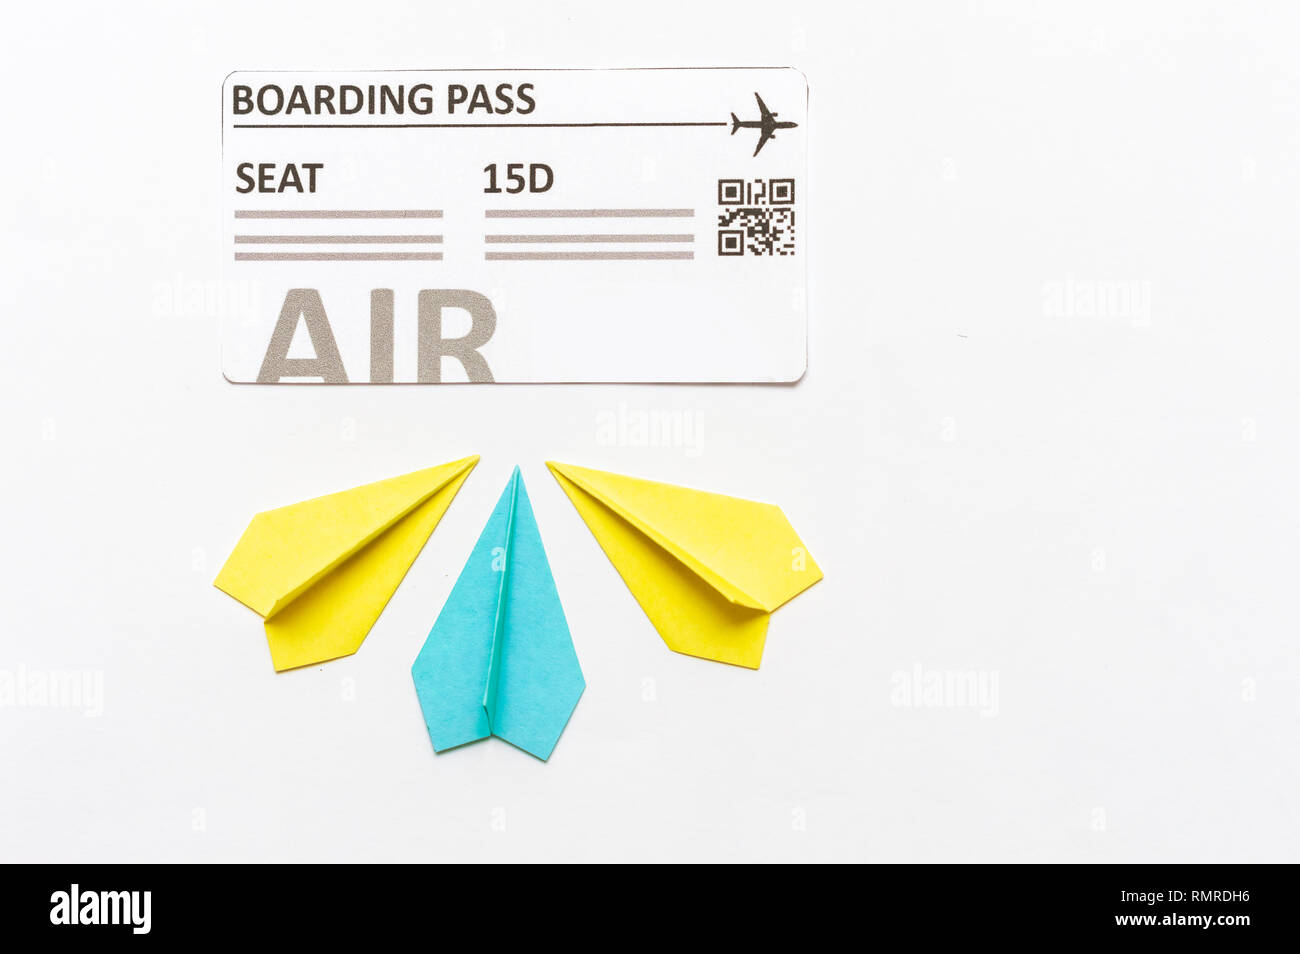 Differentiation concept in Aviation industry. Boarding pass and little paper airplanes, one blue, two yellow Stock Photo